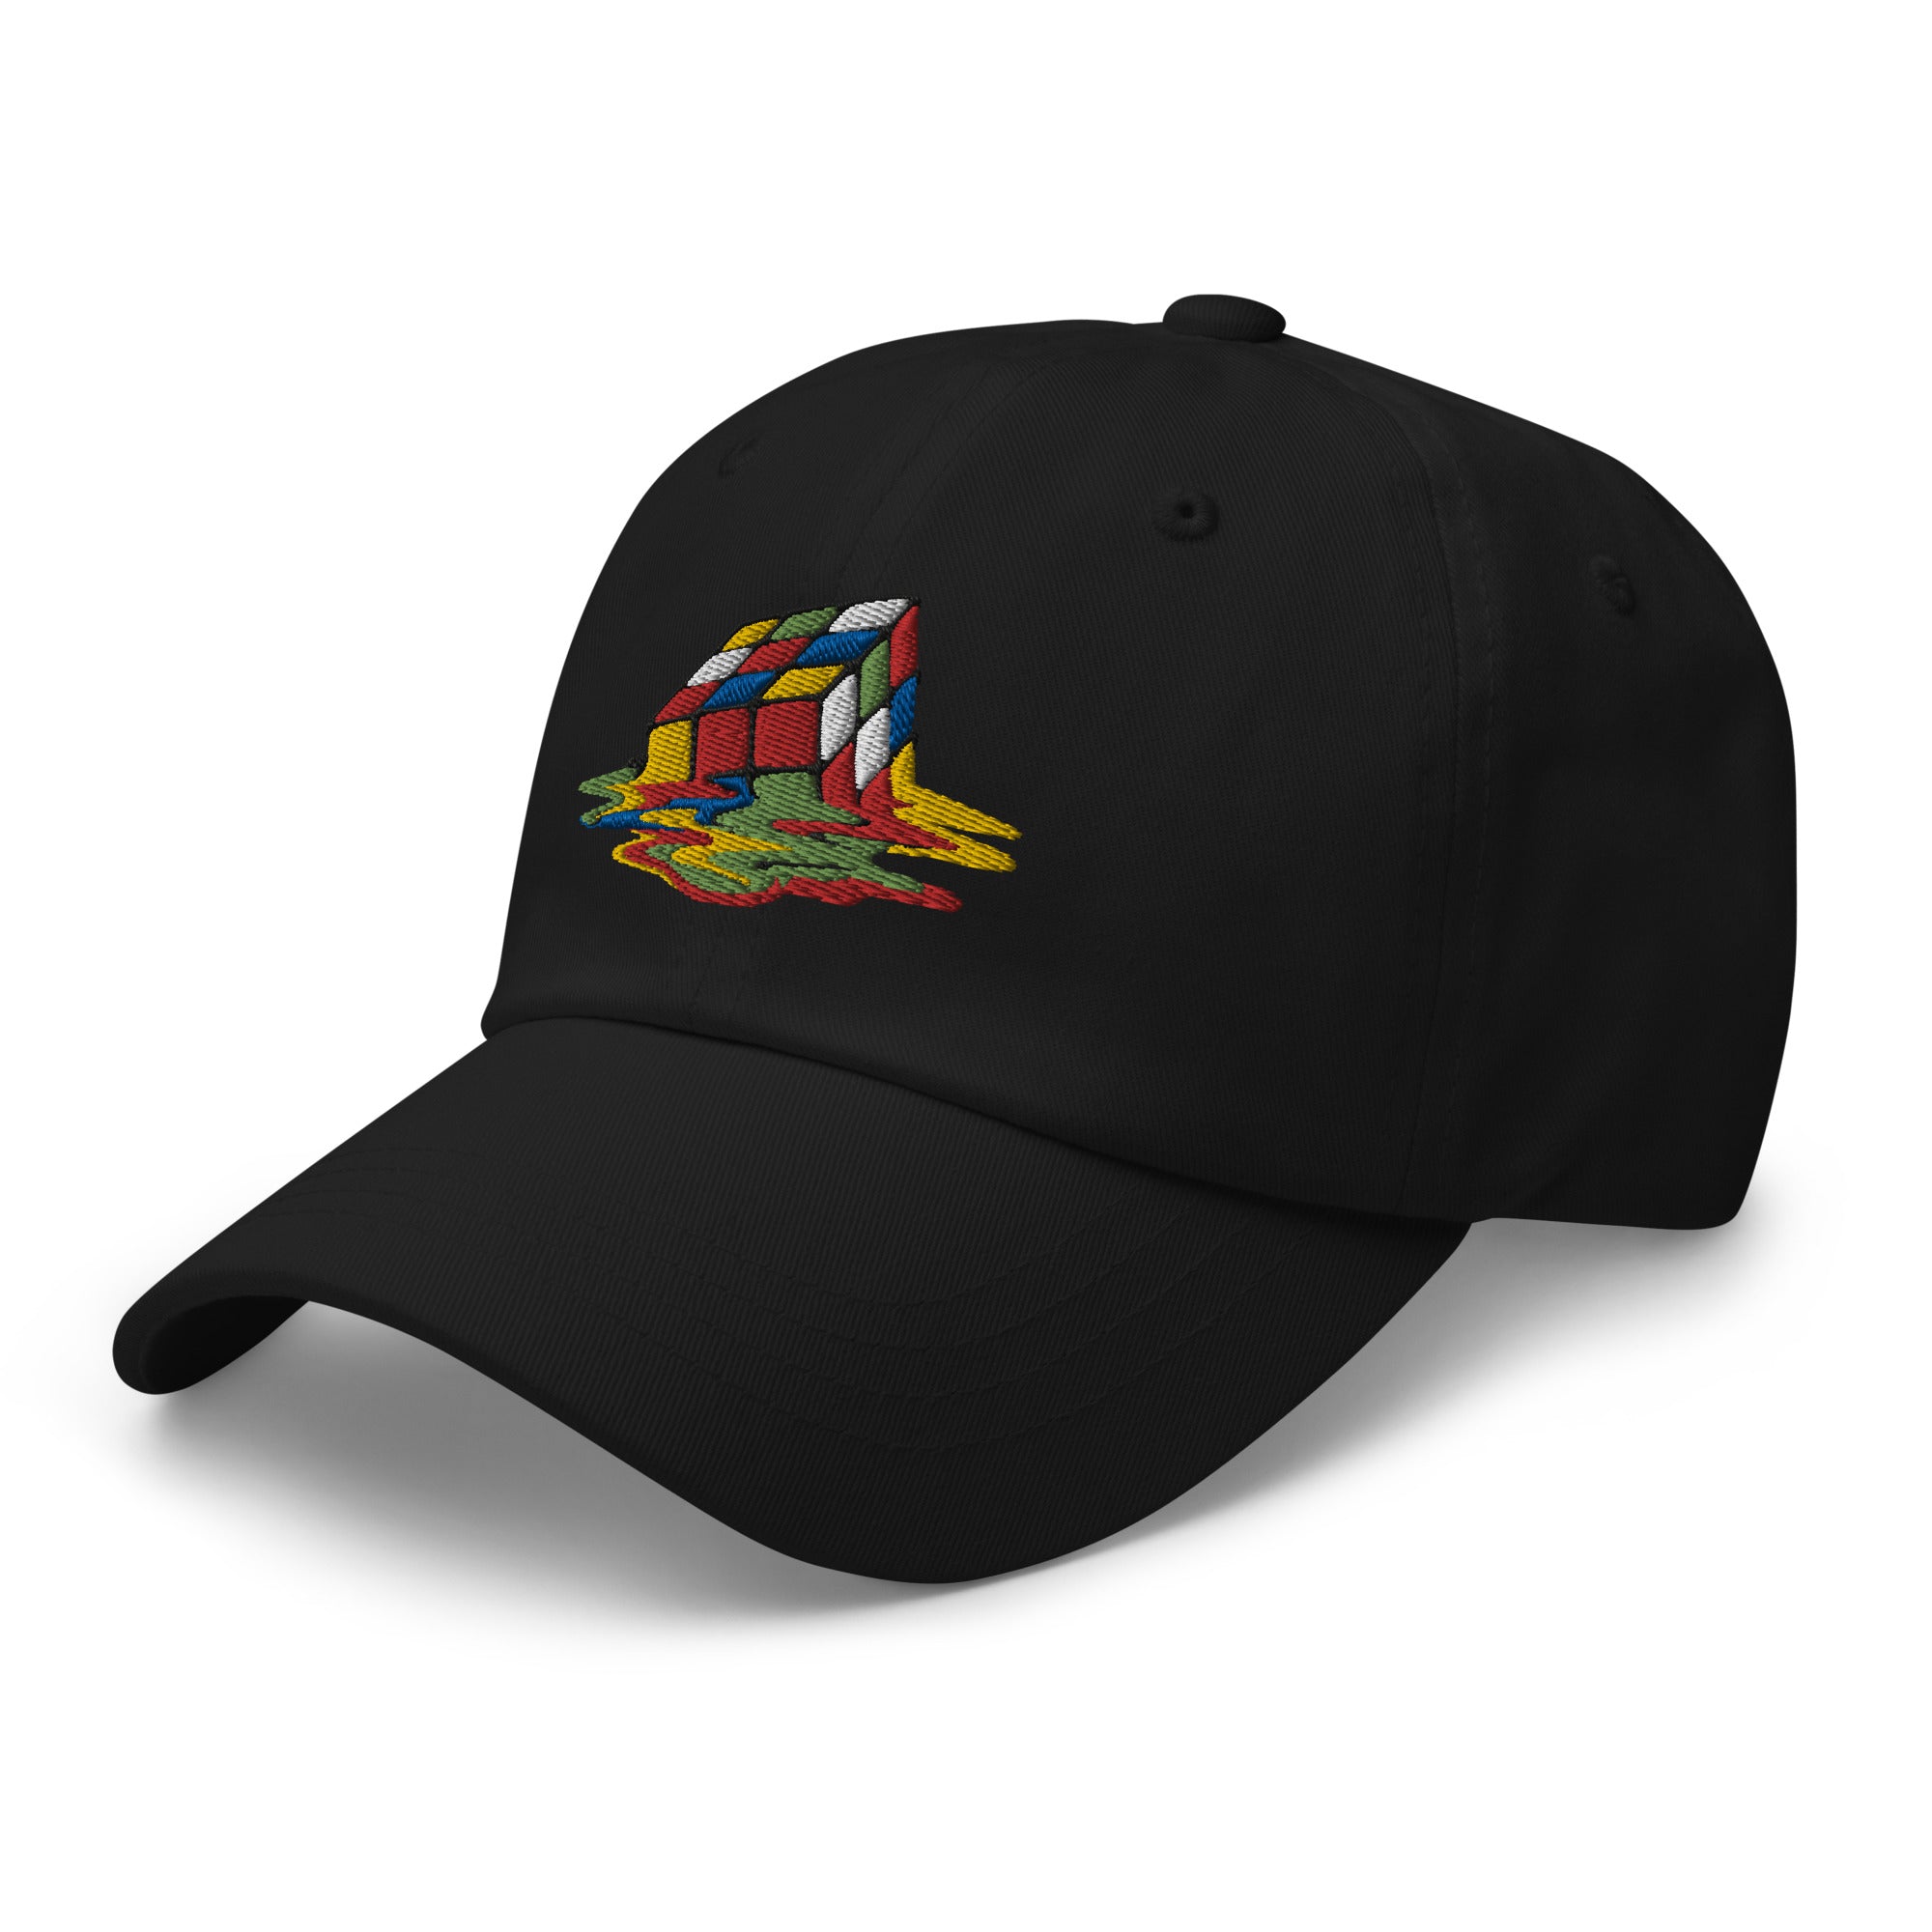 Melting Speed Cube Gaming Puzzle Box Embroidered Baseball Cap Rubik's Cube Dad hat - Edge of Life Designs